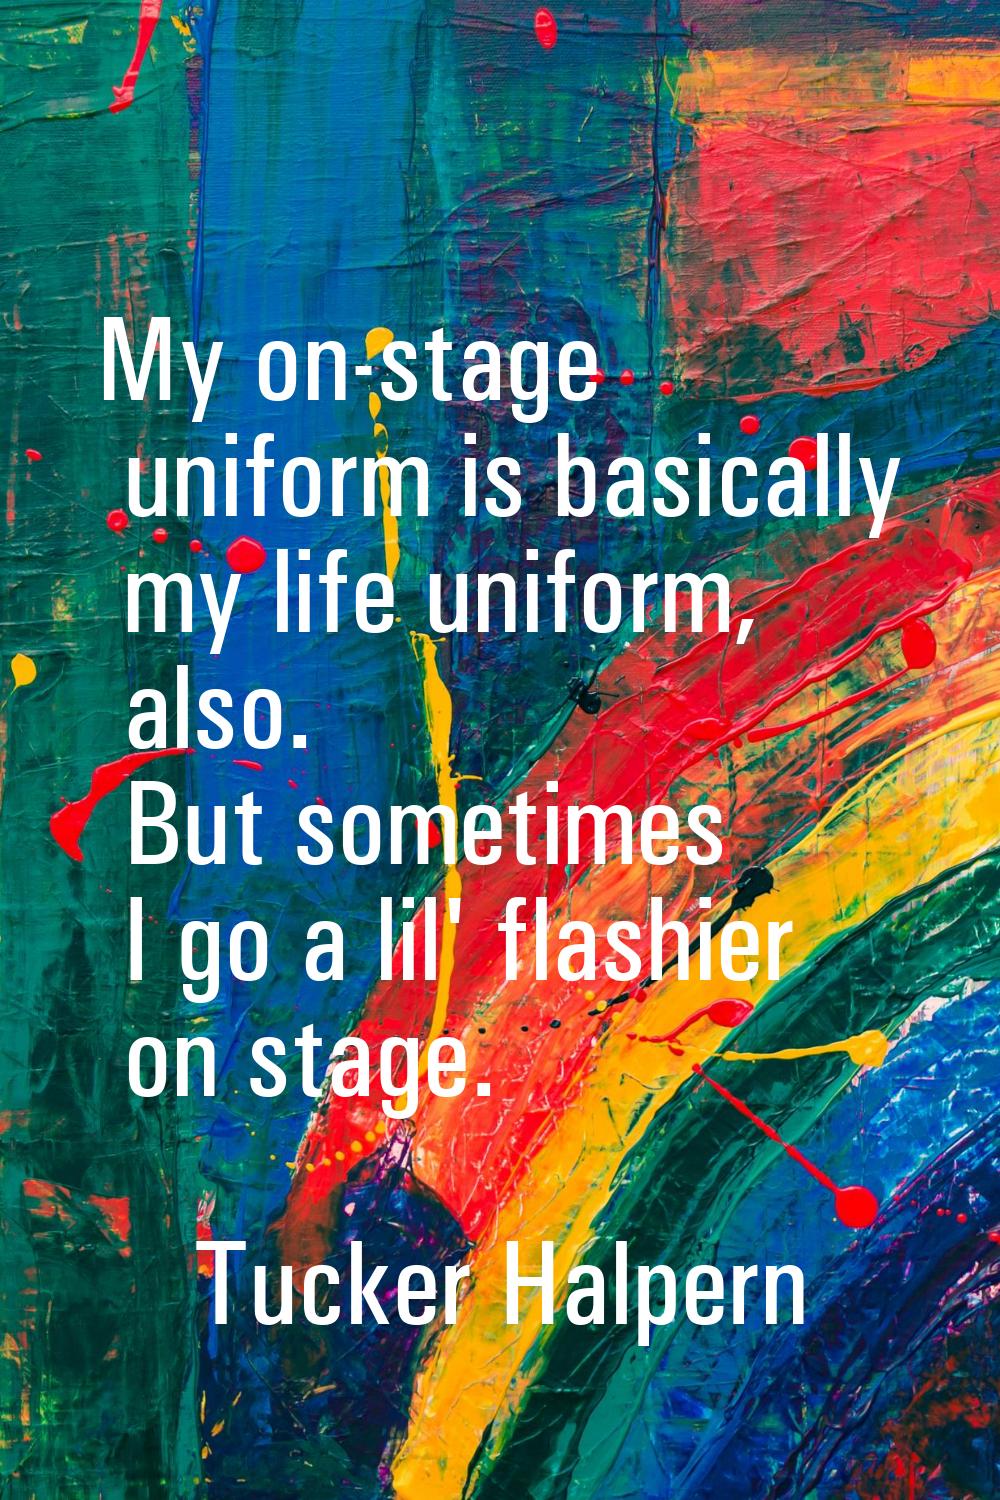 My on-stage uniform is basically my life uniform, also. But sometimes I go a lil' flashier on stage